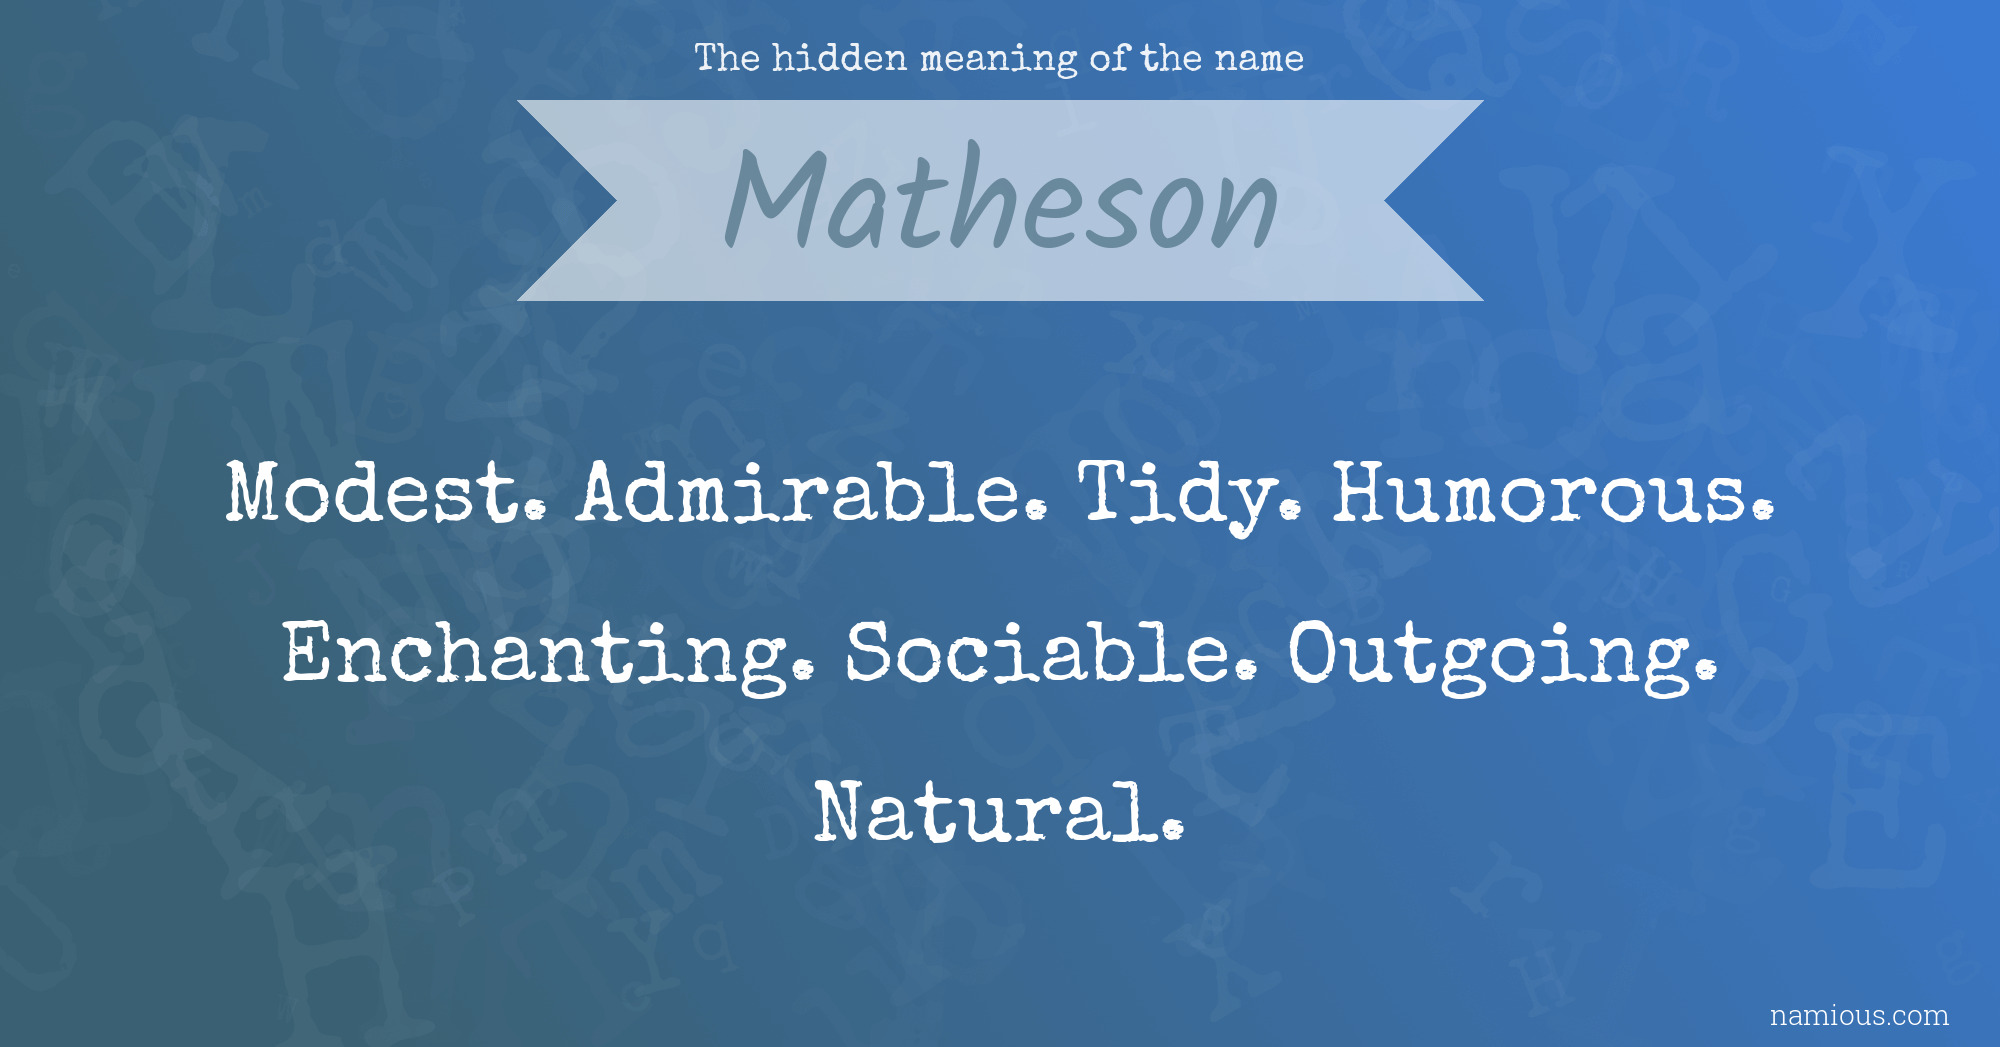 The hidden meaning of the name Matheson